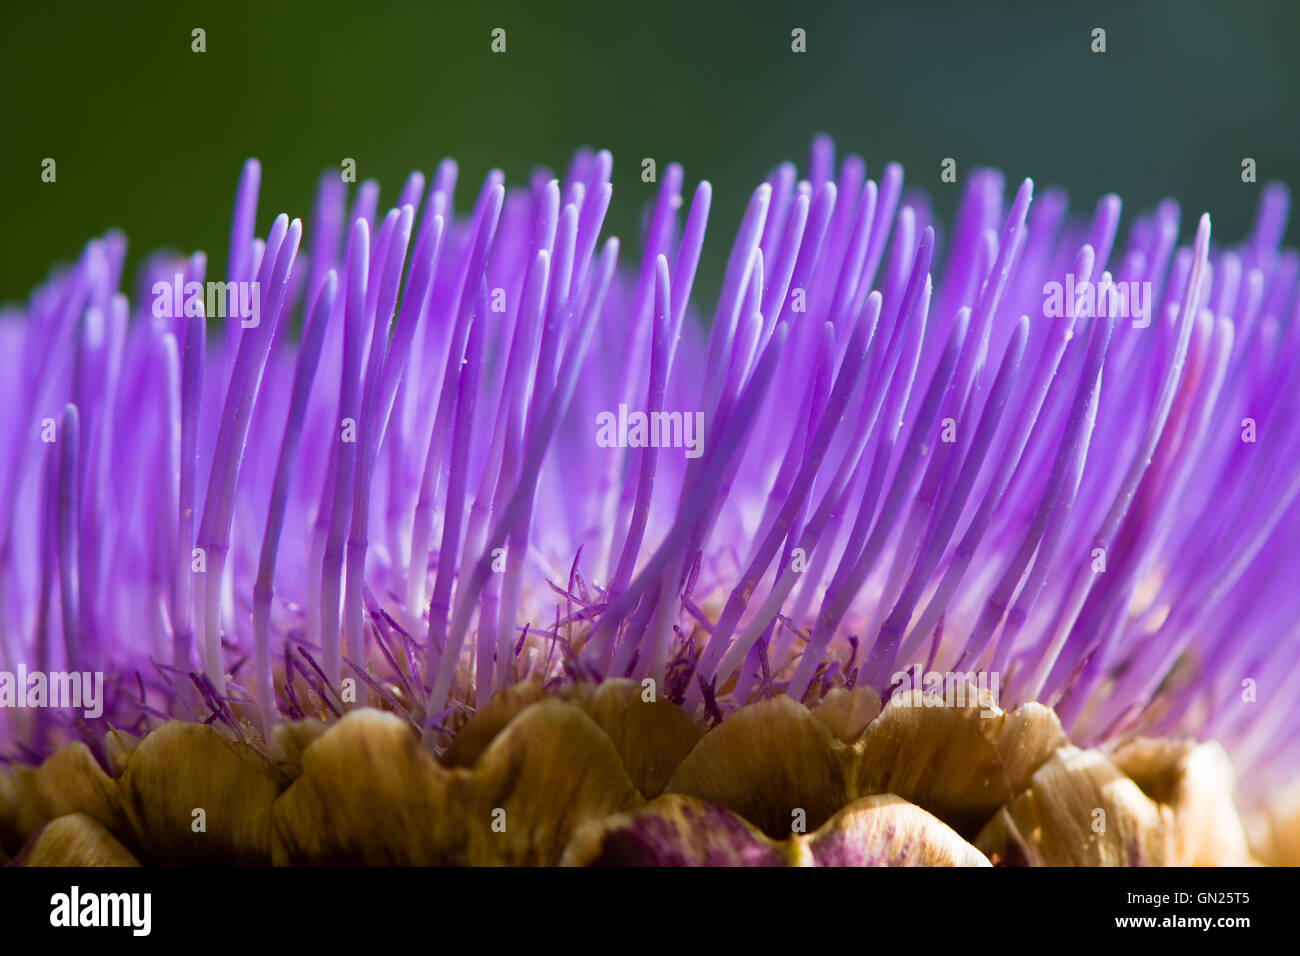 Detail of artichoke flower. Edible vegetable, also known as the cardoon, with narrow purple purple petals Stock Photo